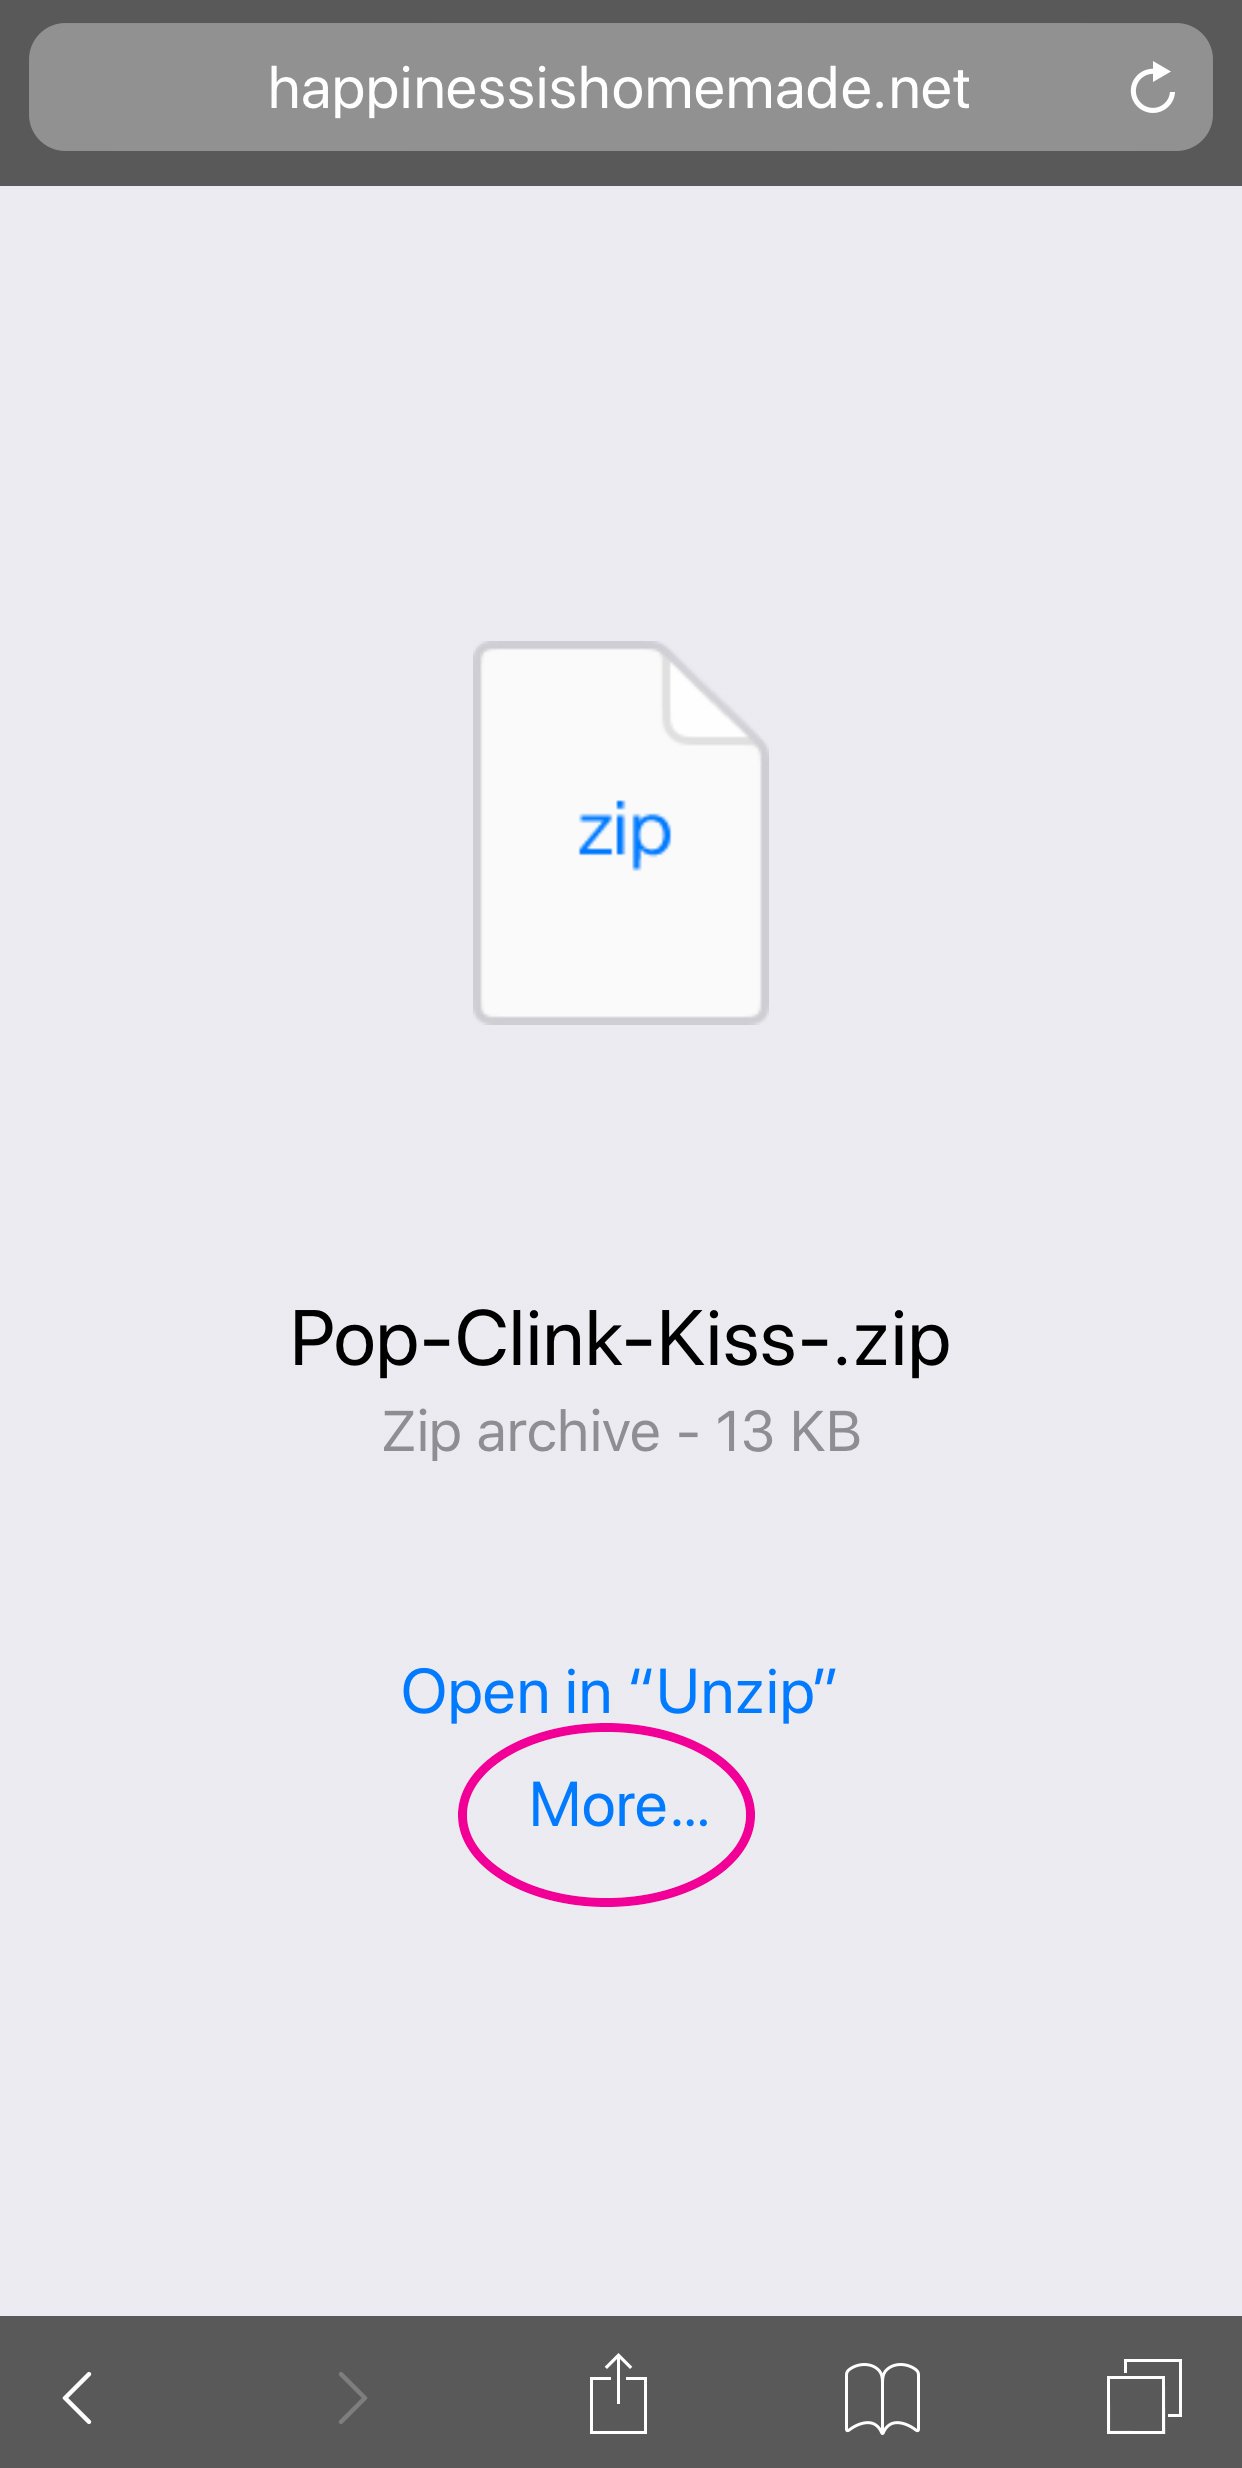 pop clink kiss zip file with more option circled